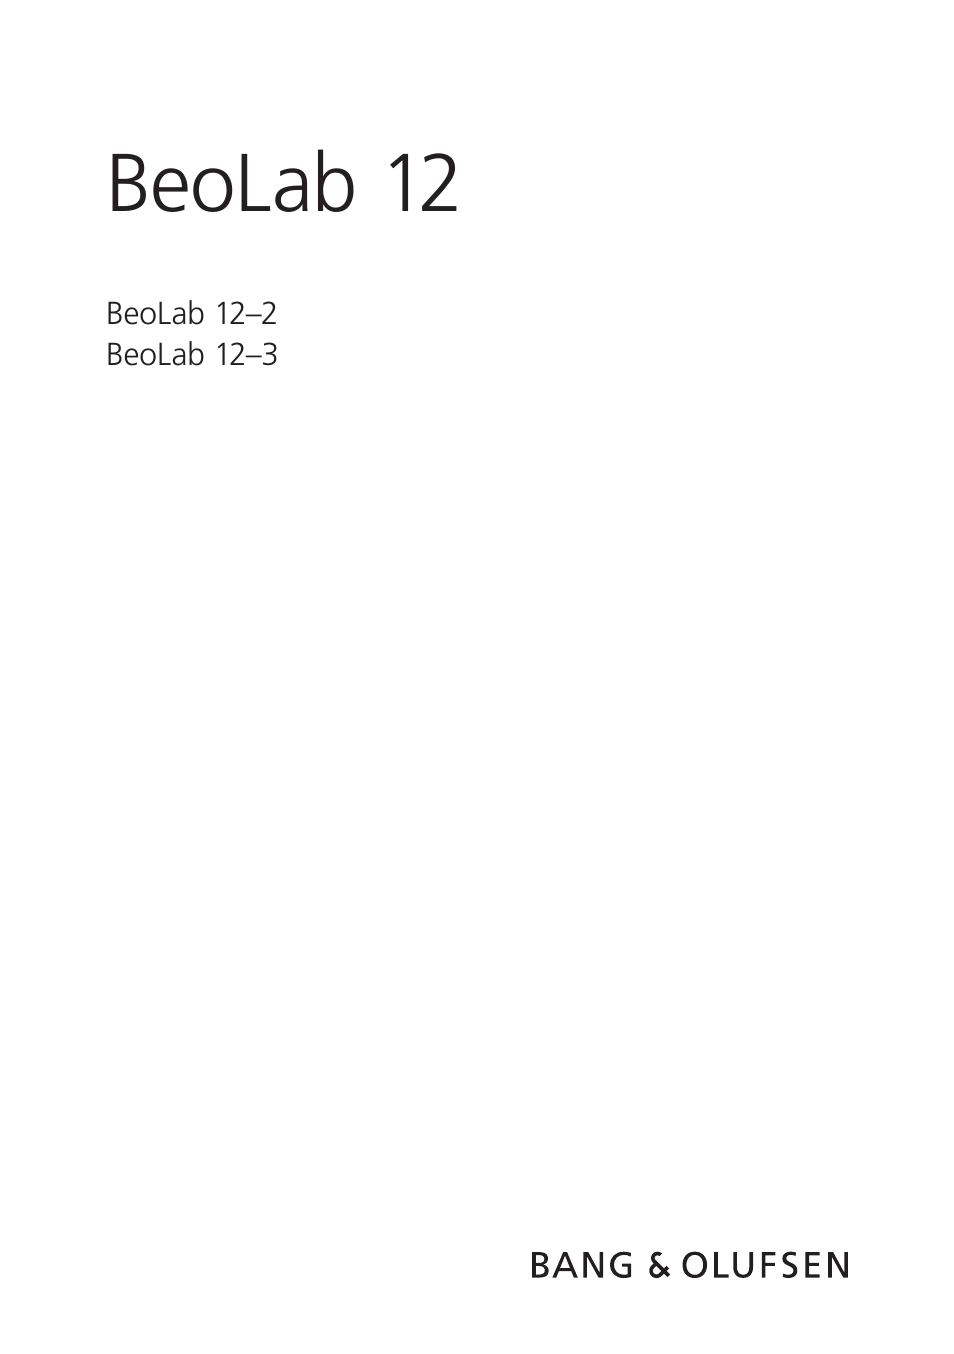 BeoLab 12-3 - User Guide